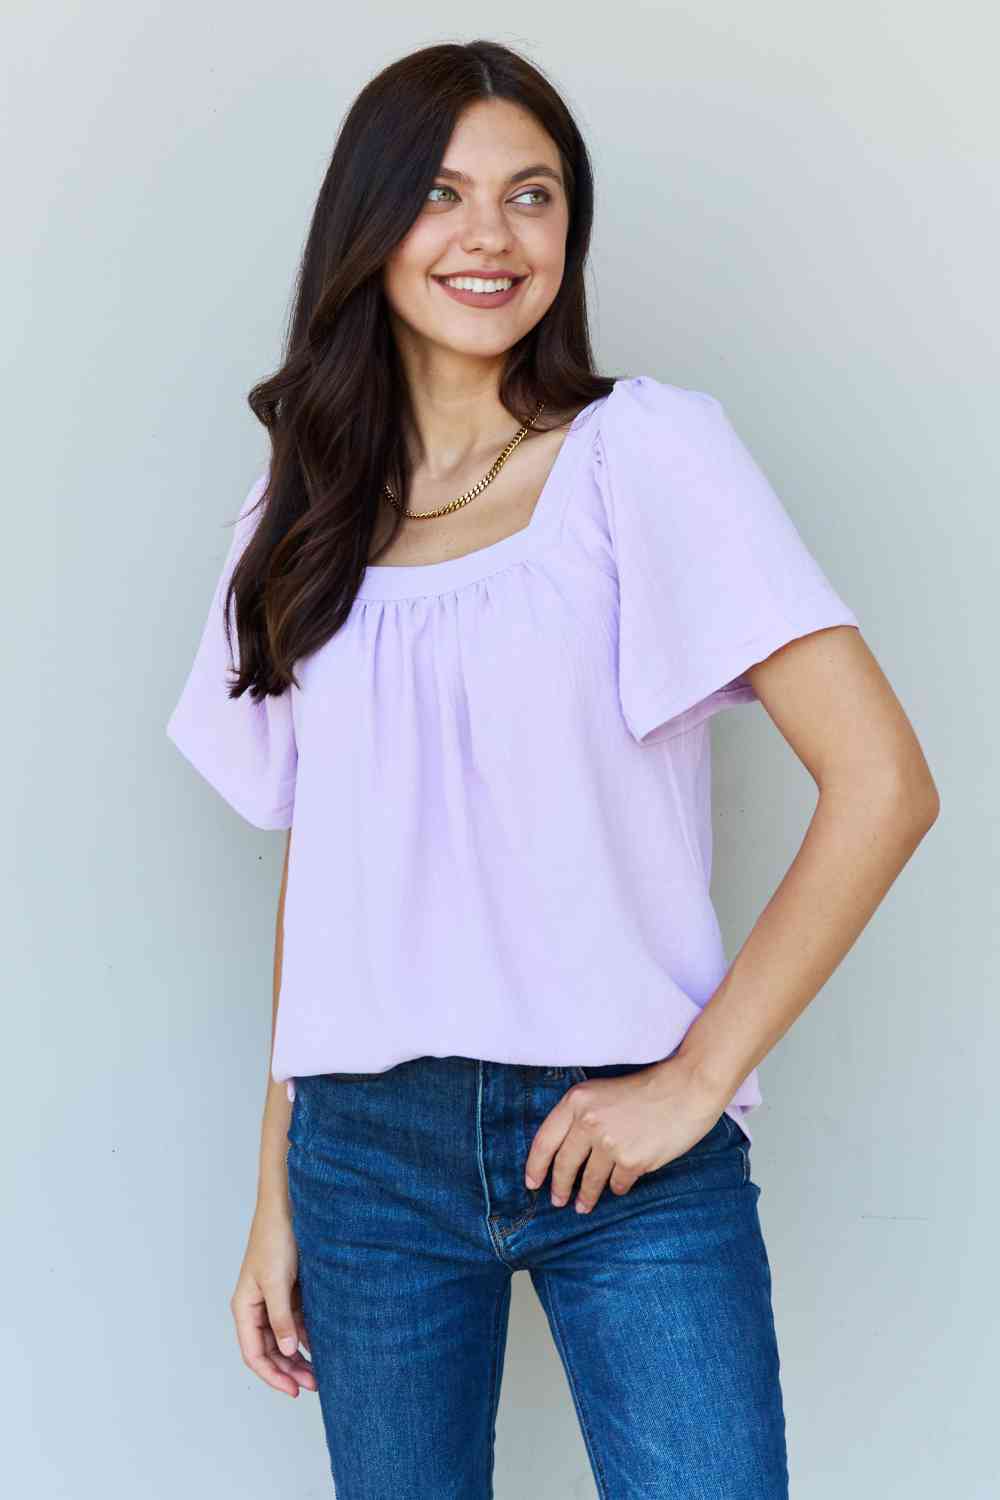 Ninexis Keep Me Close Square Neck Short Sleeve Blouse in Lavender